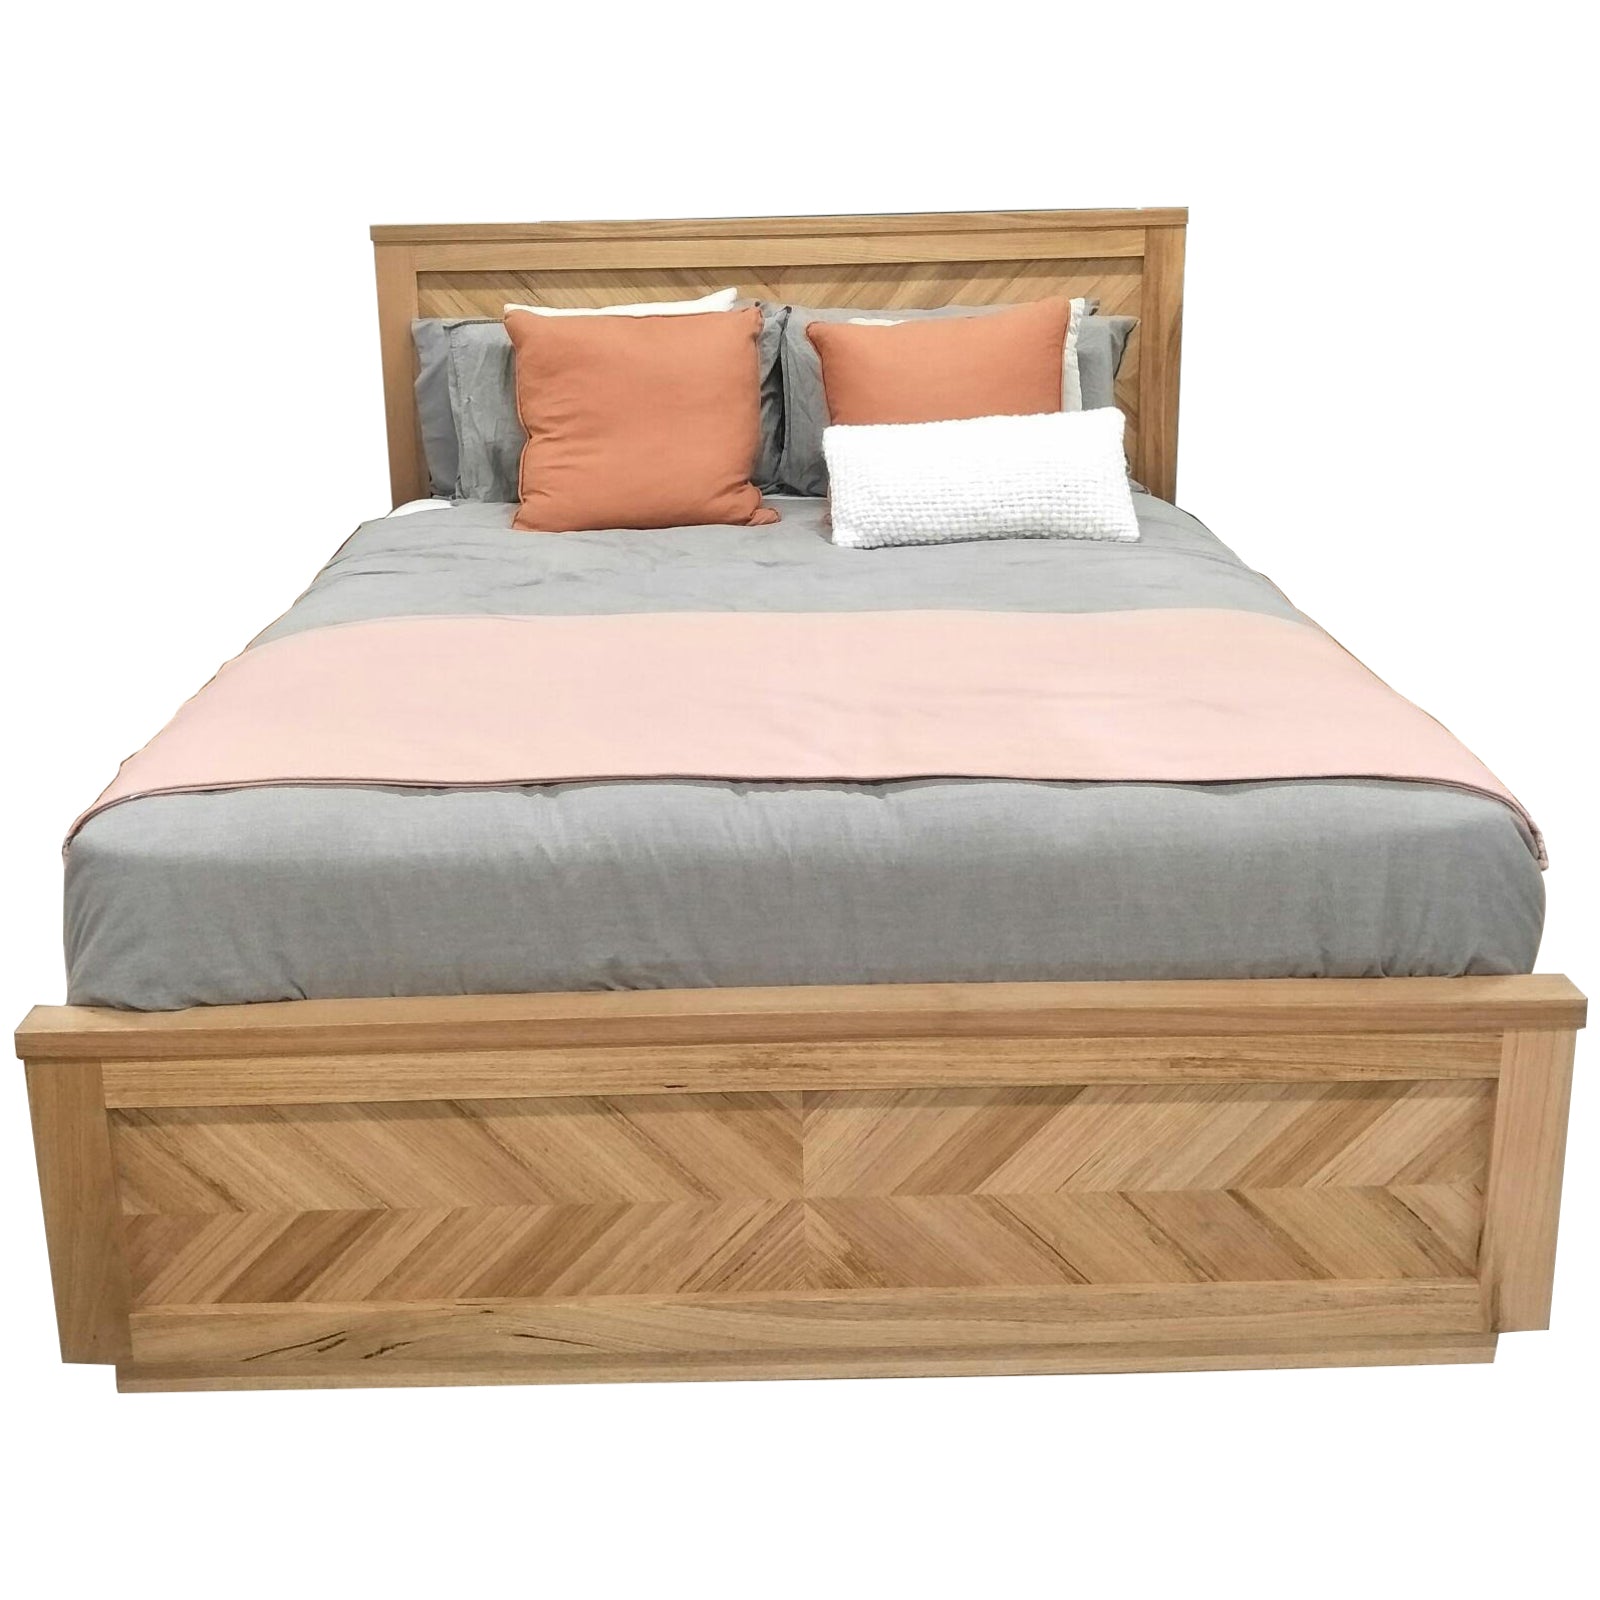 King Size Bed Frame With Headboard in Parquet Solid Messmate Timber